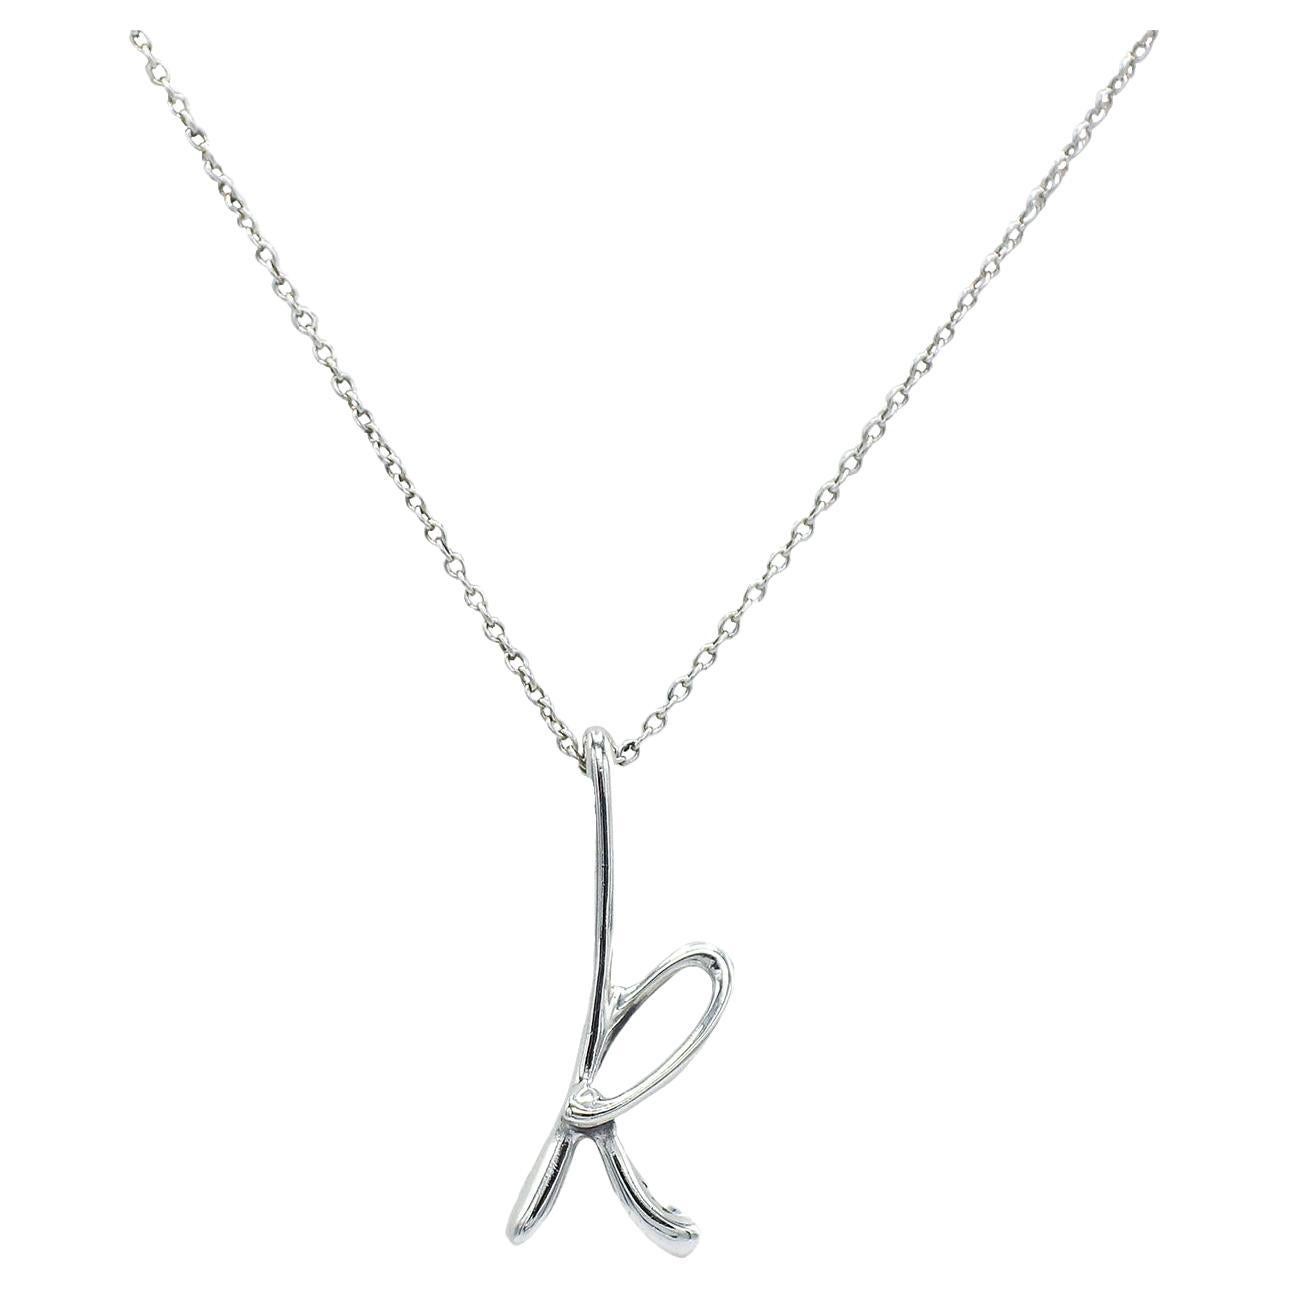 Authentic Tiffany & Co. Elsa Peretti Alphabet K Silver Necklace 16”,  Women's Fashion, Jewelry & Organisers, Necklaces on Carousell